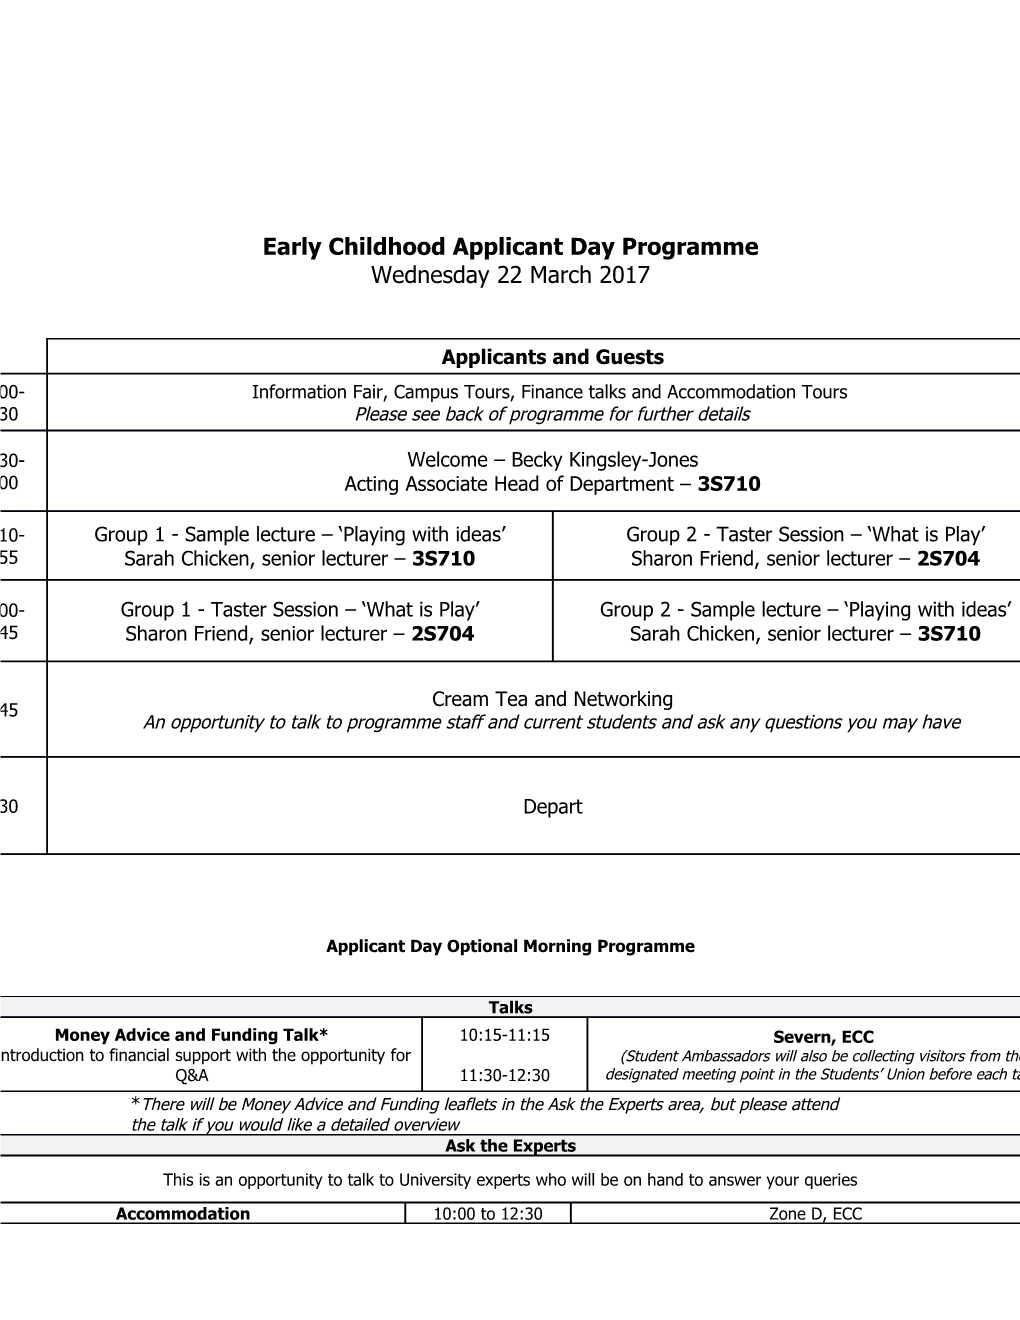 Early Childhood Applicant Dayprogramme